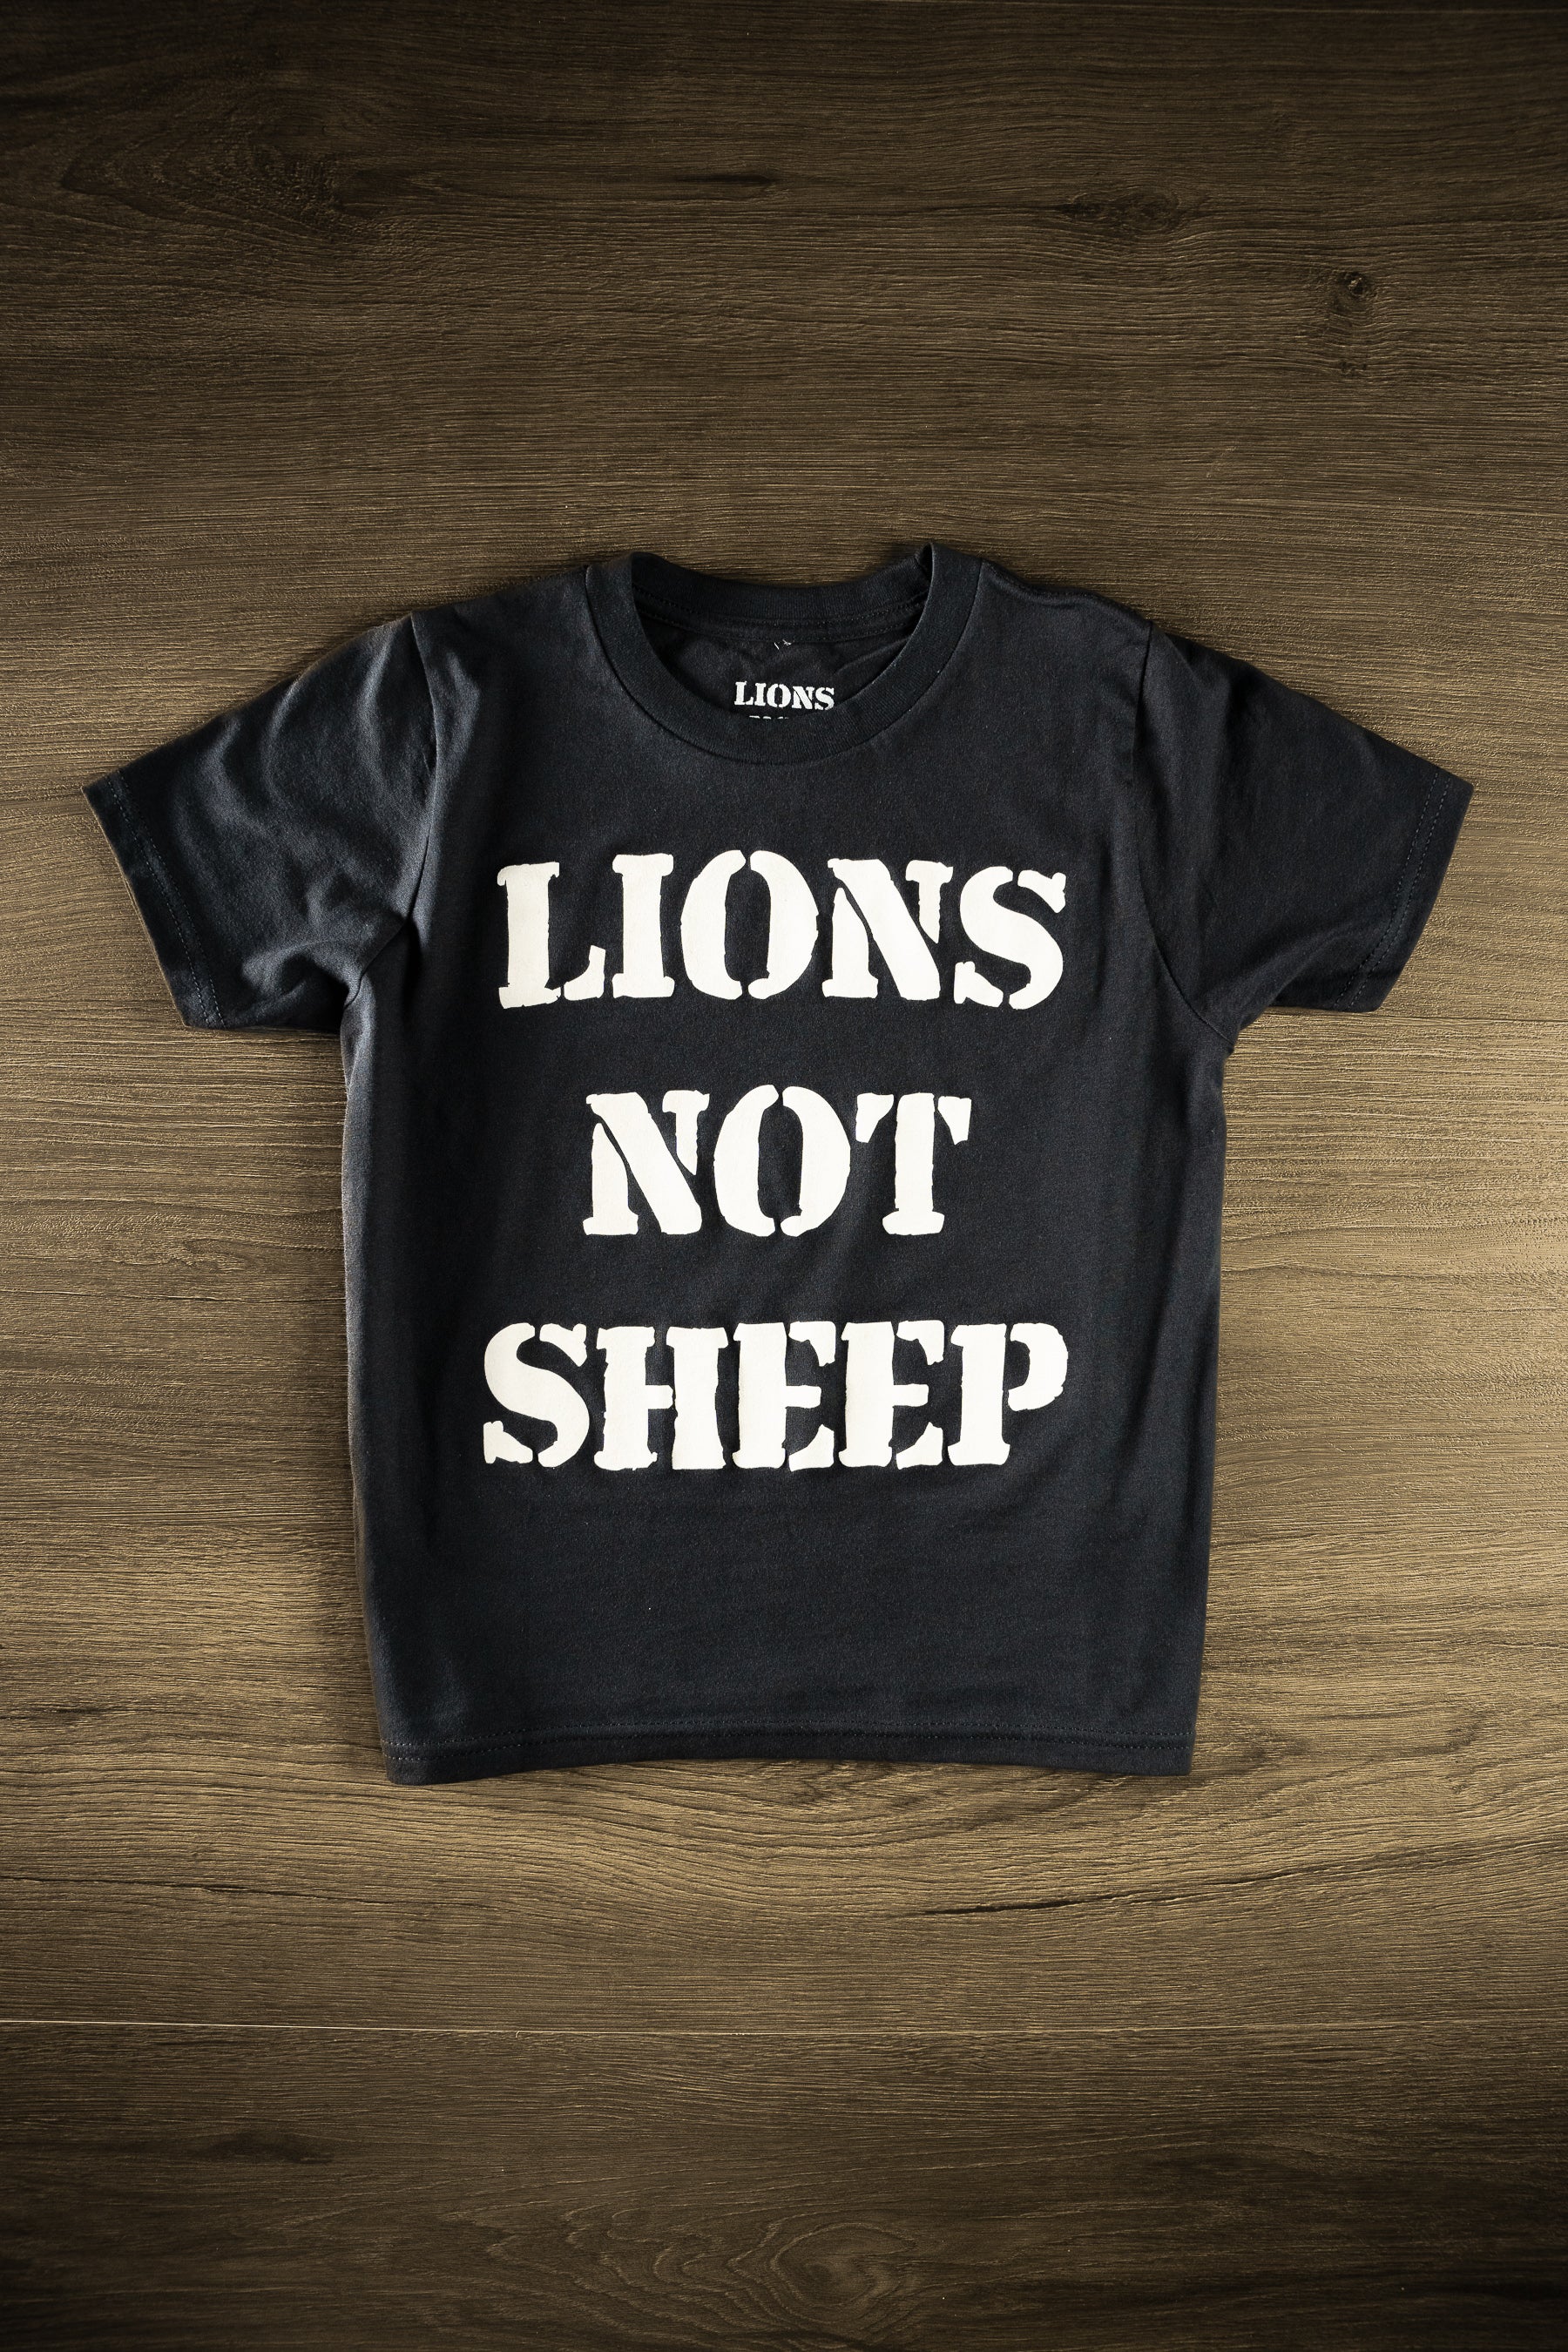 Lions Not Sheep "OG" Youth Tee - Lions Not Sheep ®